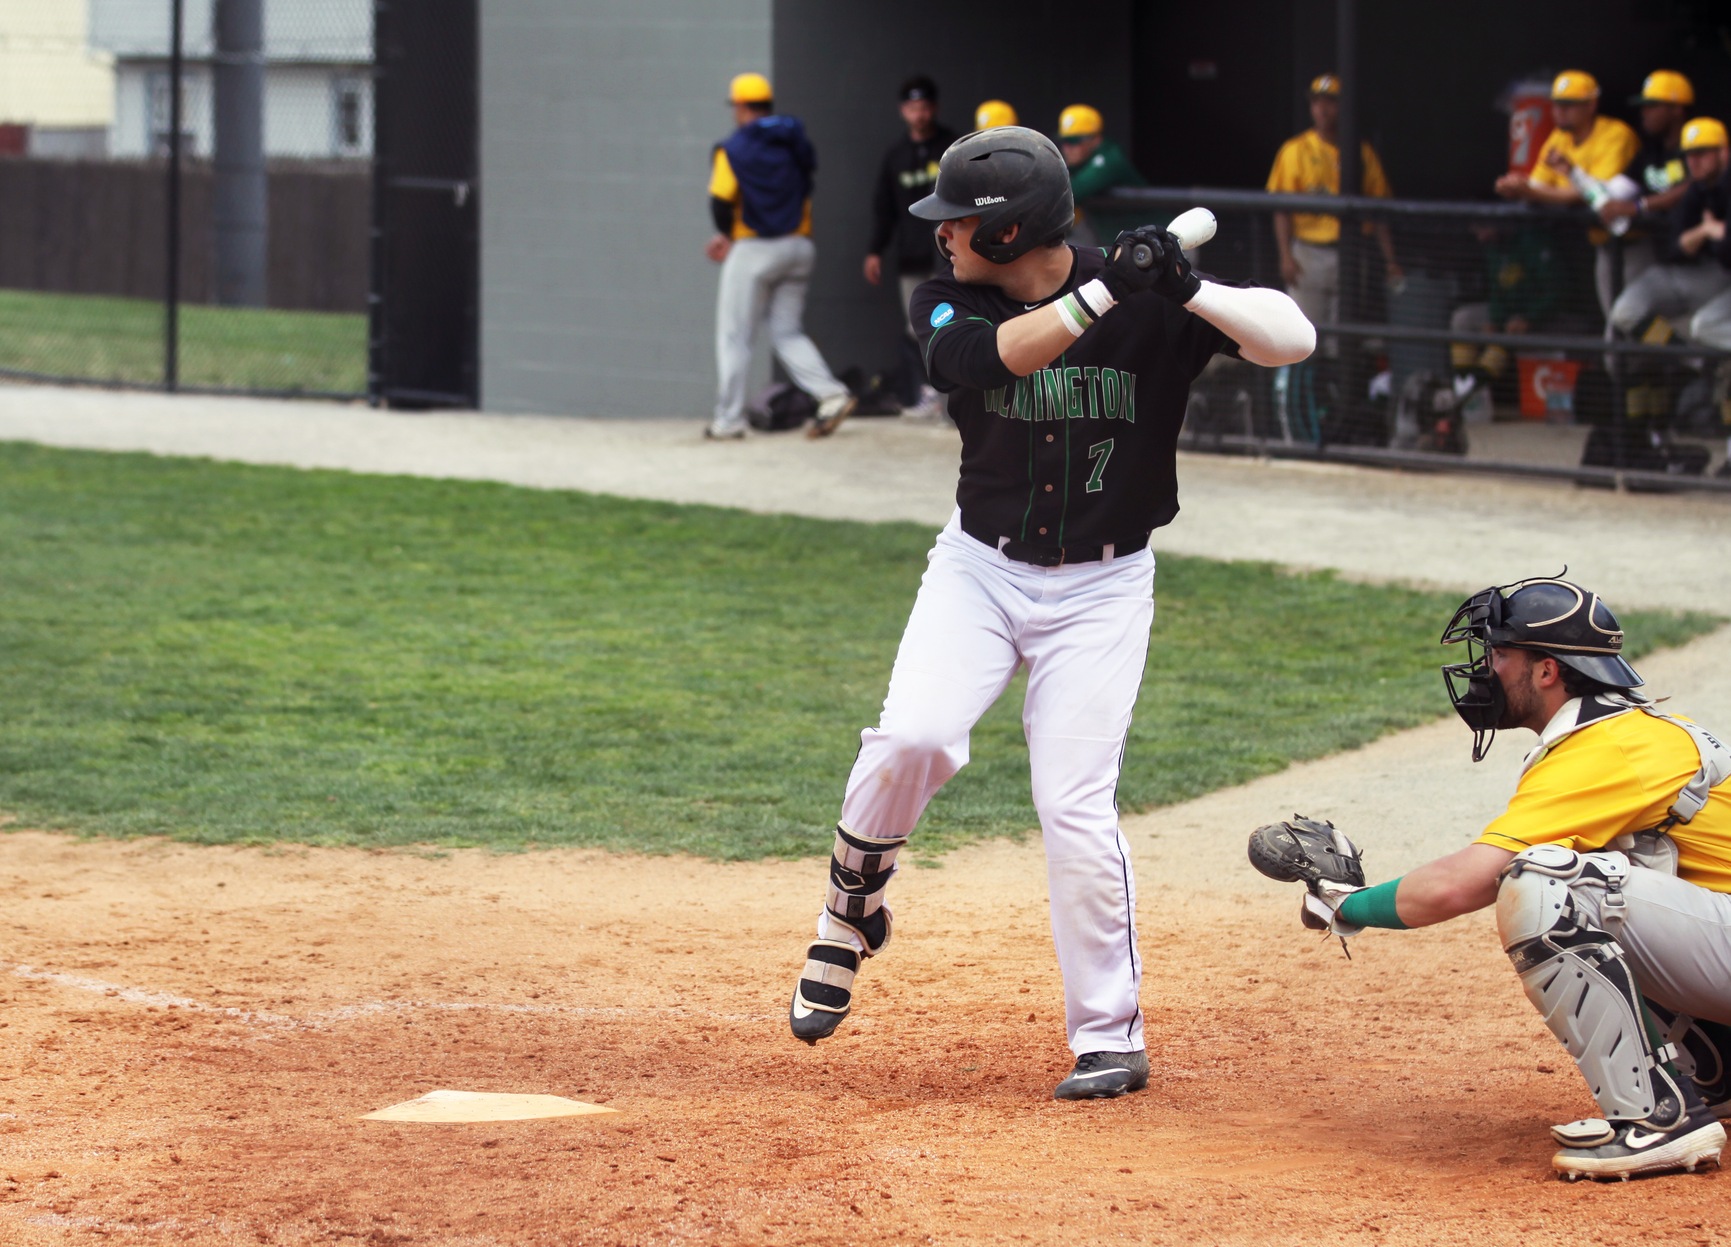 Copyright 2019; Wilmington University. All rights reserved. File photo of Kendall Small who went 4-for-6 witha double and two RBI, while pitching 3.2 innings in game two. Photo by Katlynne Tubo.